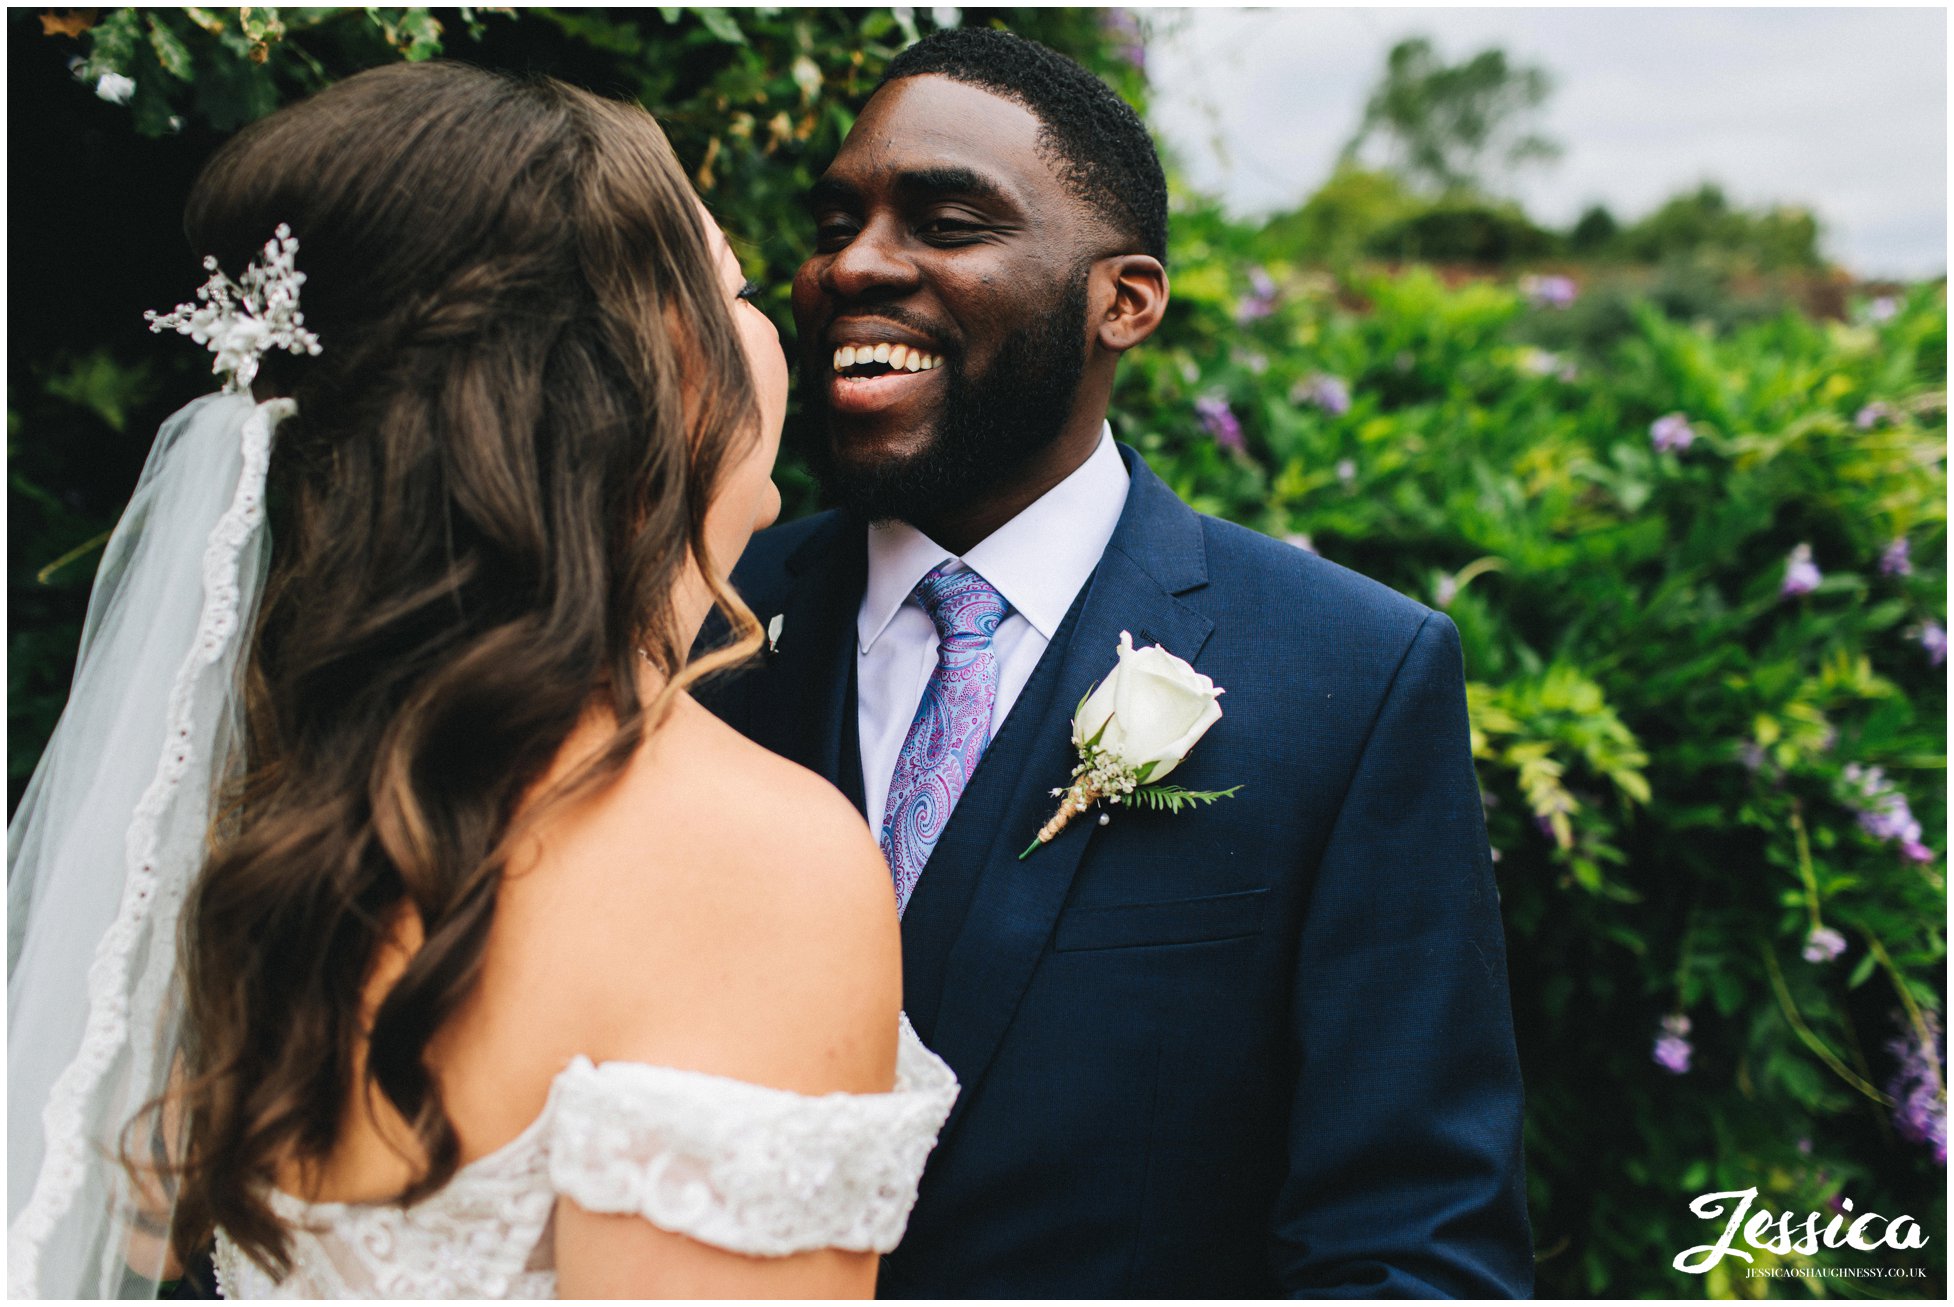 the groom laughs as he speaks to his new wife